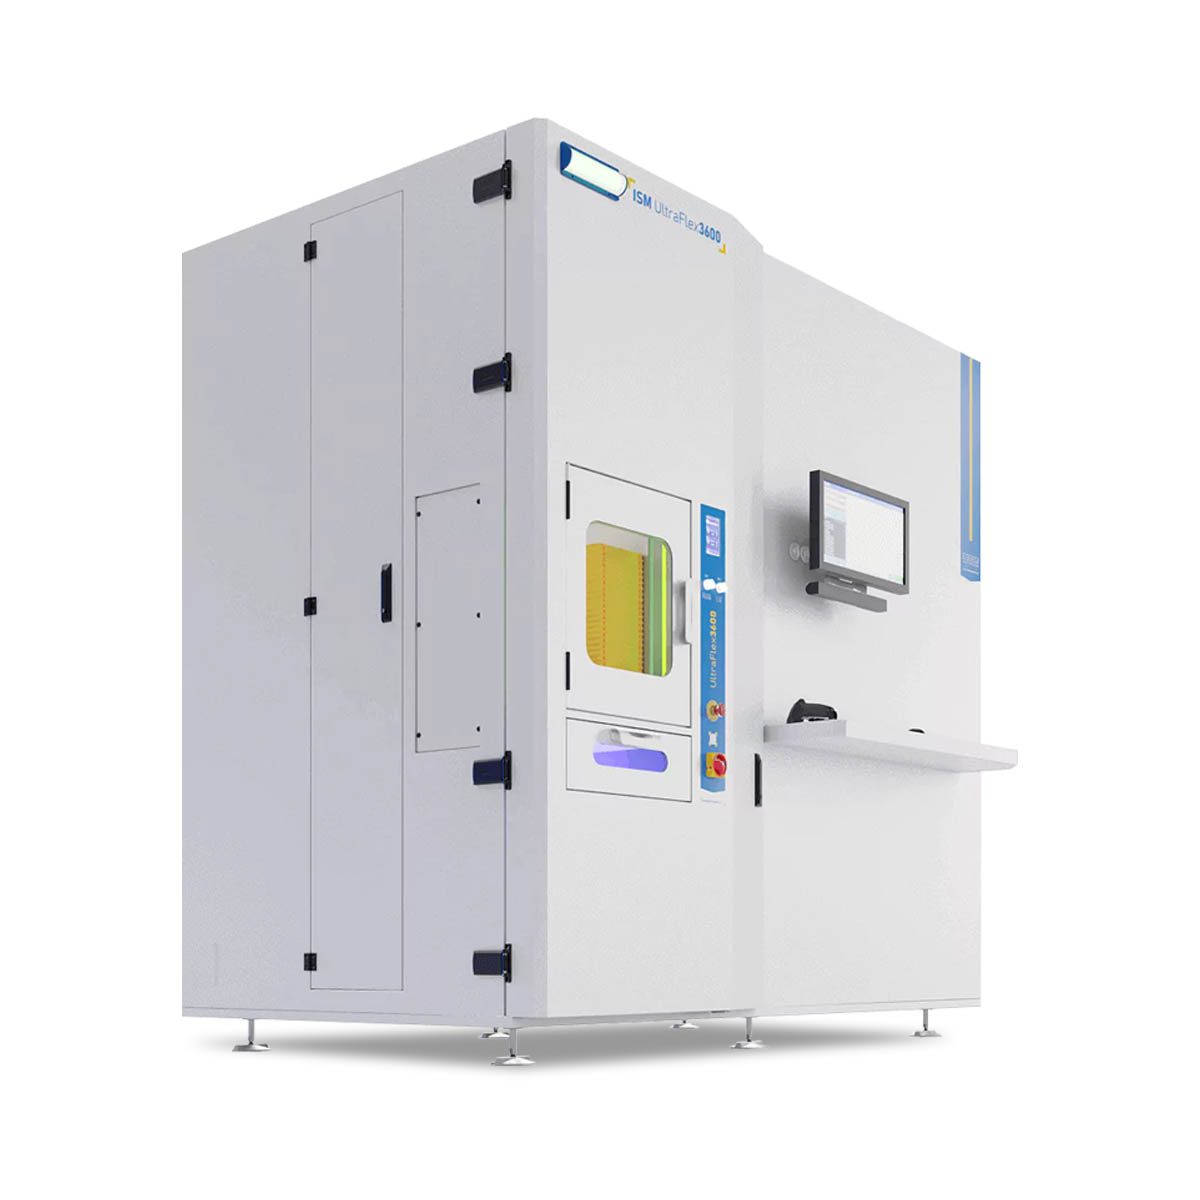 Essegfi Automation ISM UltraFlex 3600 storage and management of electronic production components